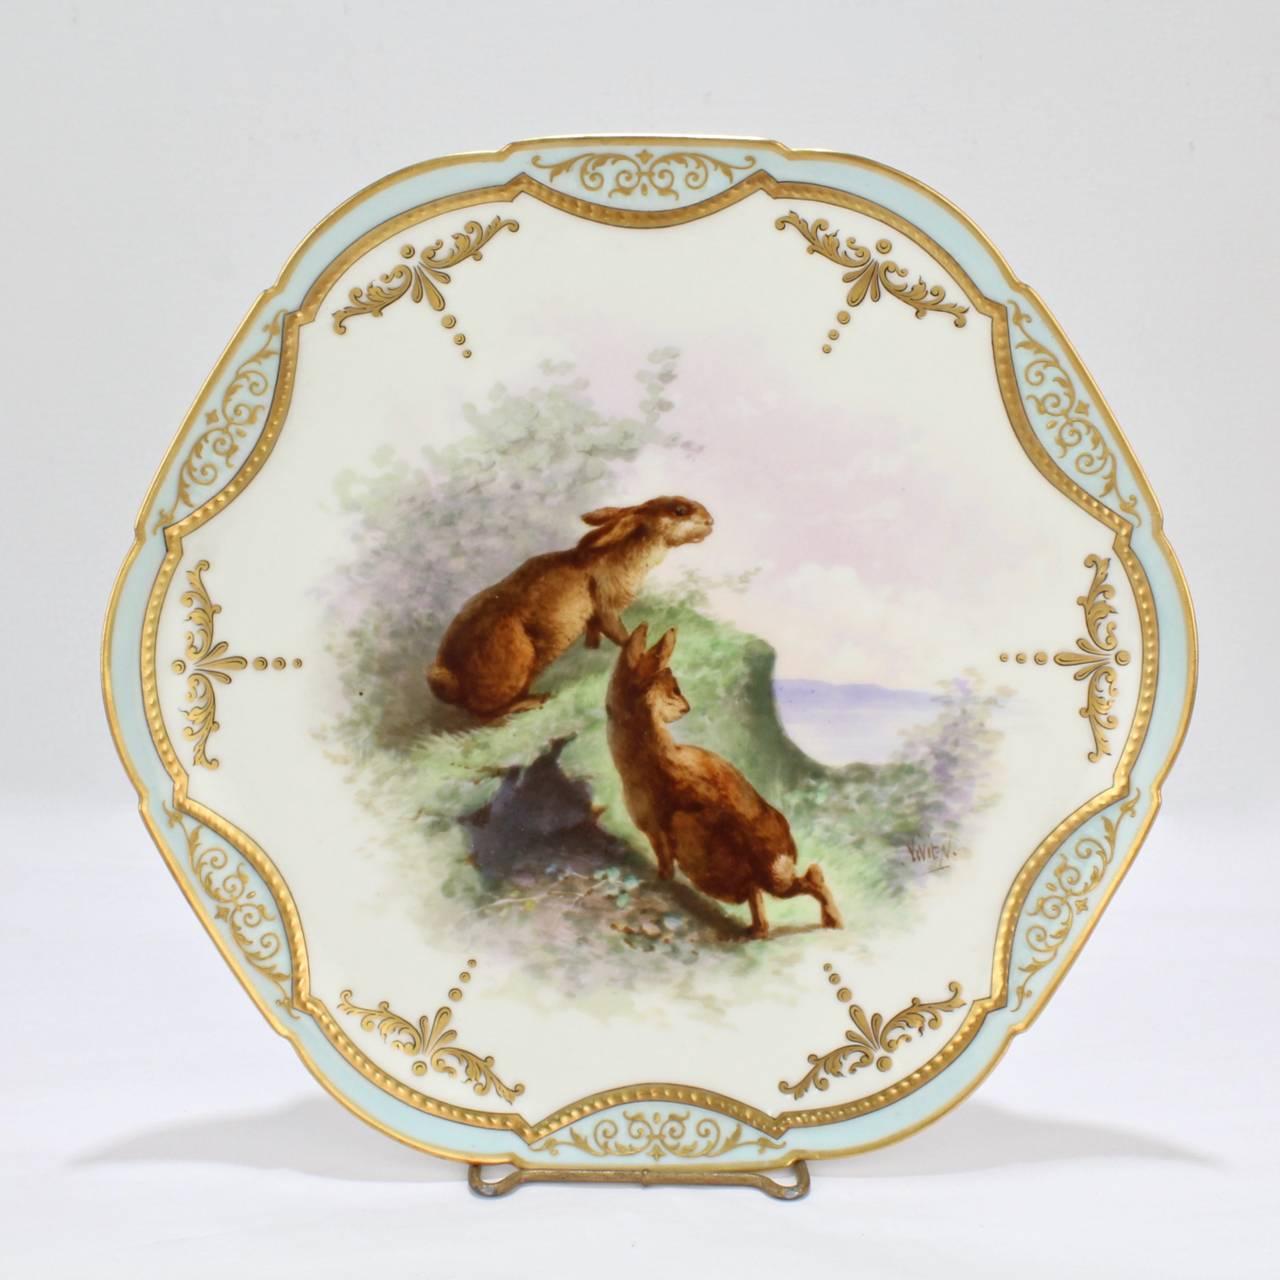 19th Century 12 French Limoges Porcelain Narcisse Vivien Hand-Painted Game Plates